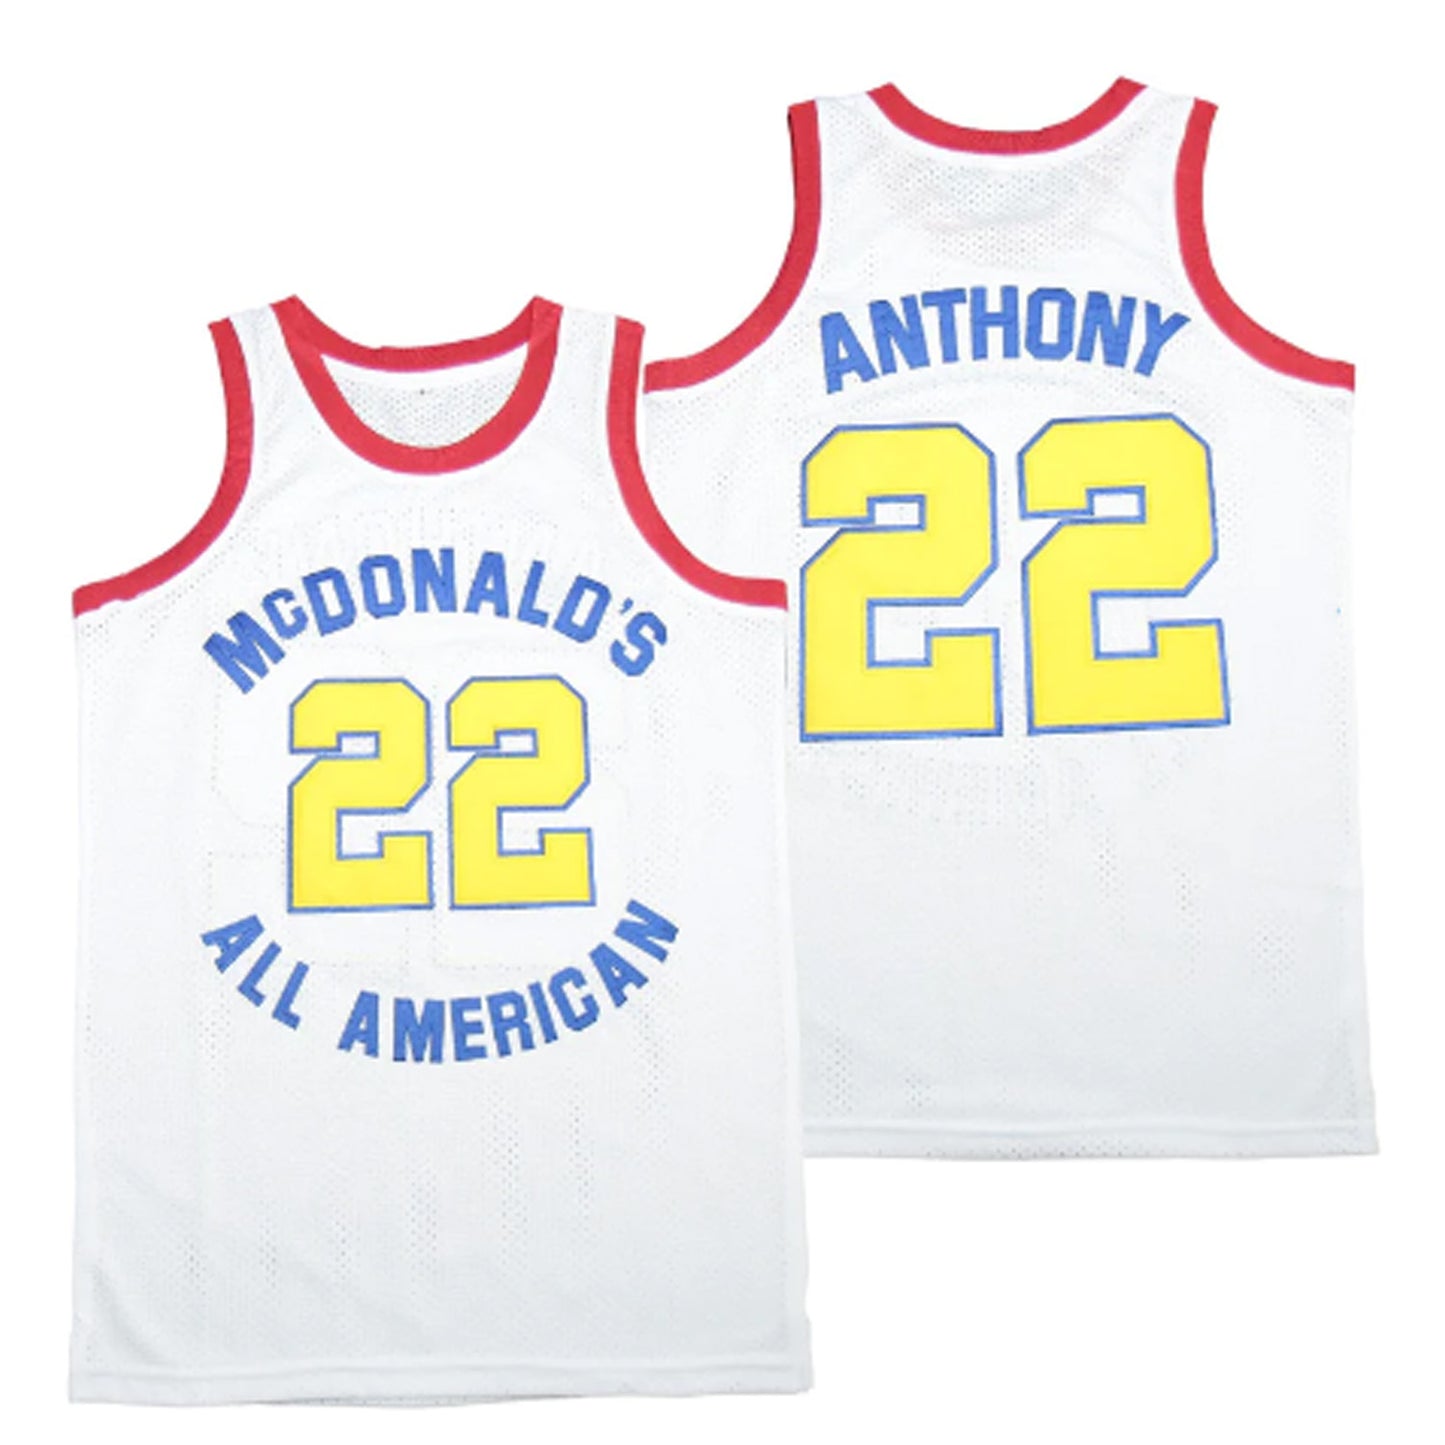 Carmelo Anthony All-American 22 Jersey